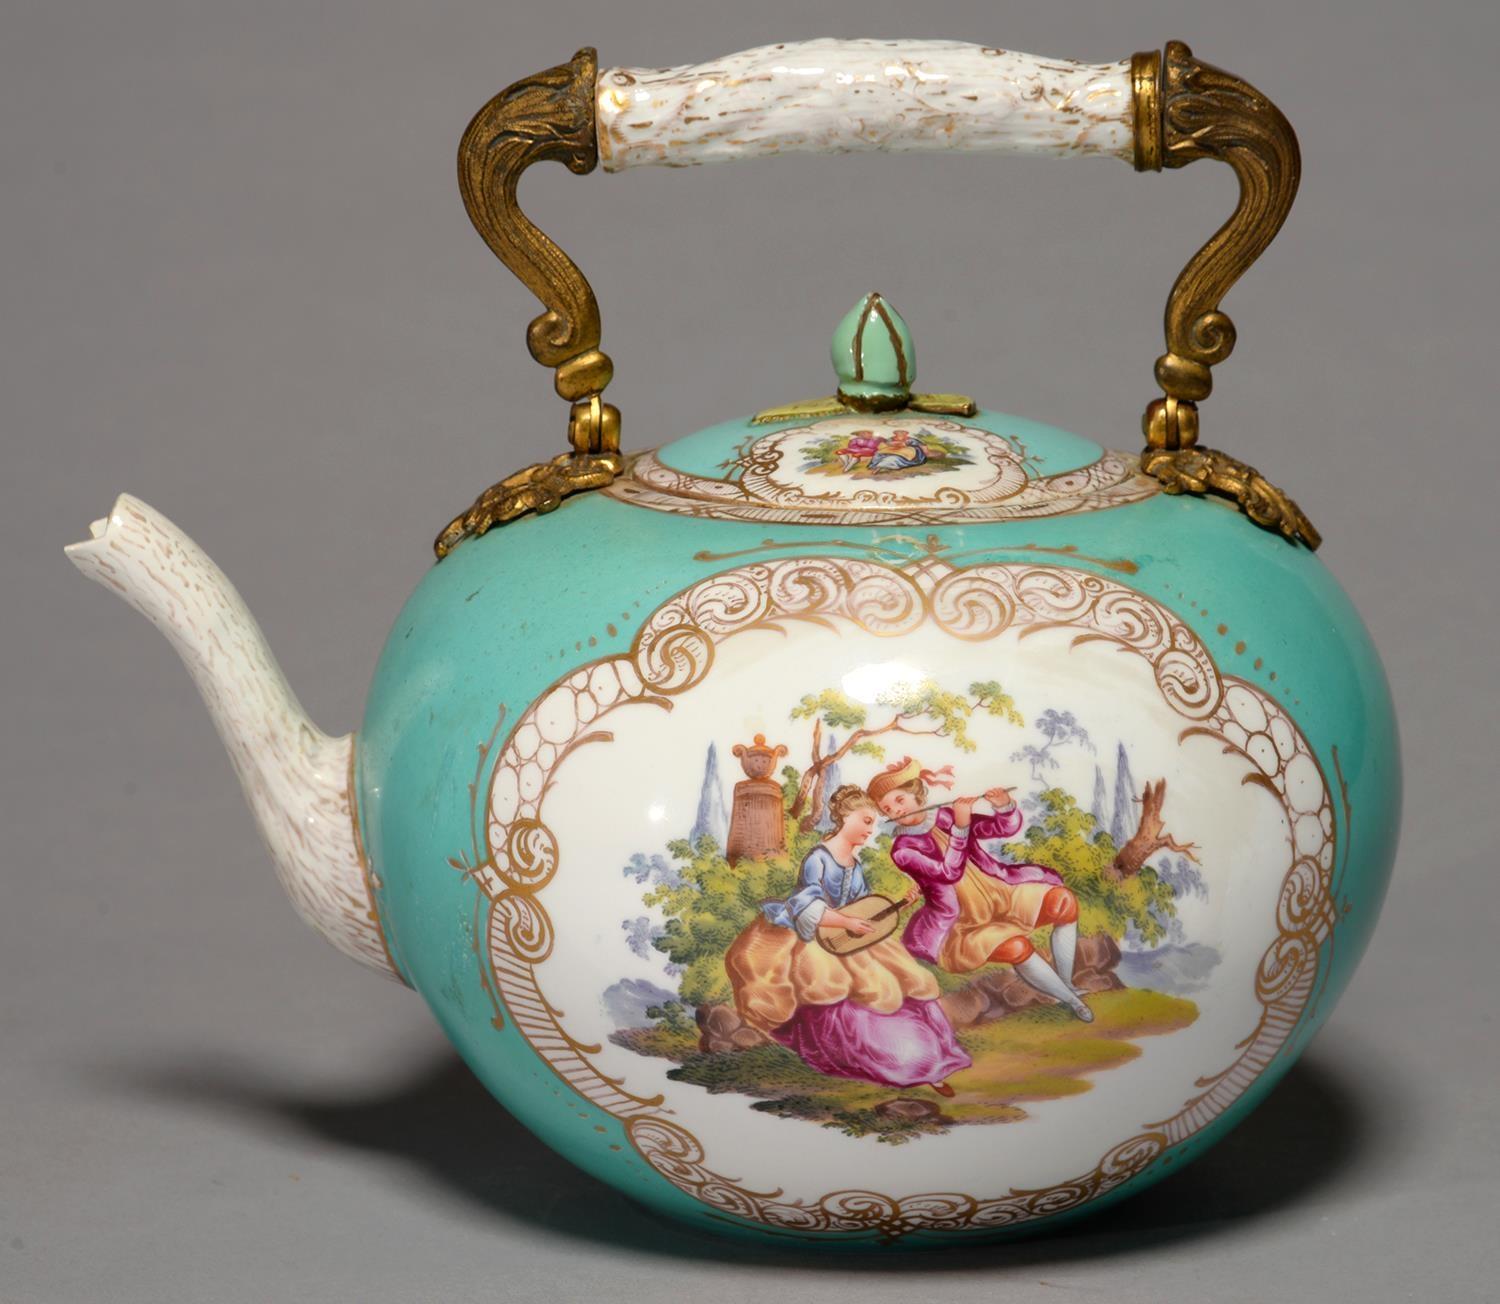 A MEISSEN TURQUOISE GROUND GLOBULAR TEA KETTLE AND COVER, LATE 19TH C, MOUNTED WITH ORMOLU SWING